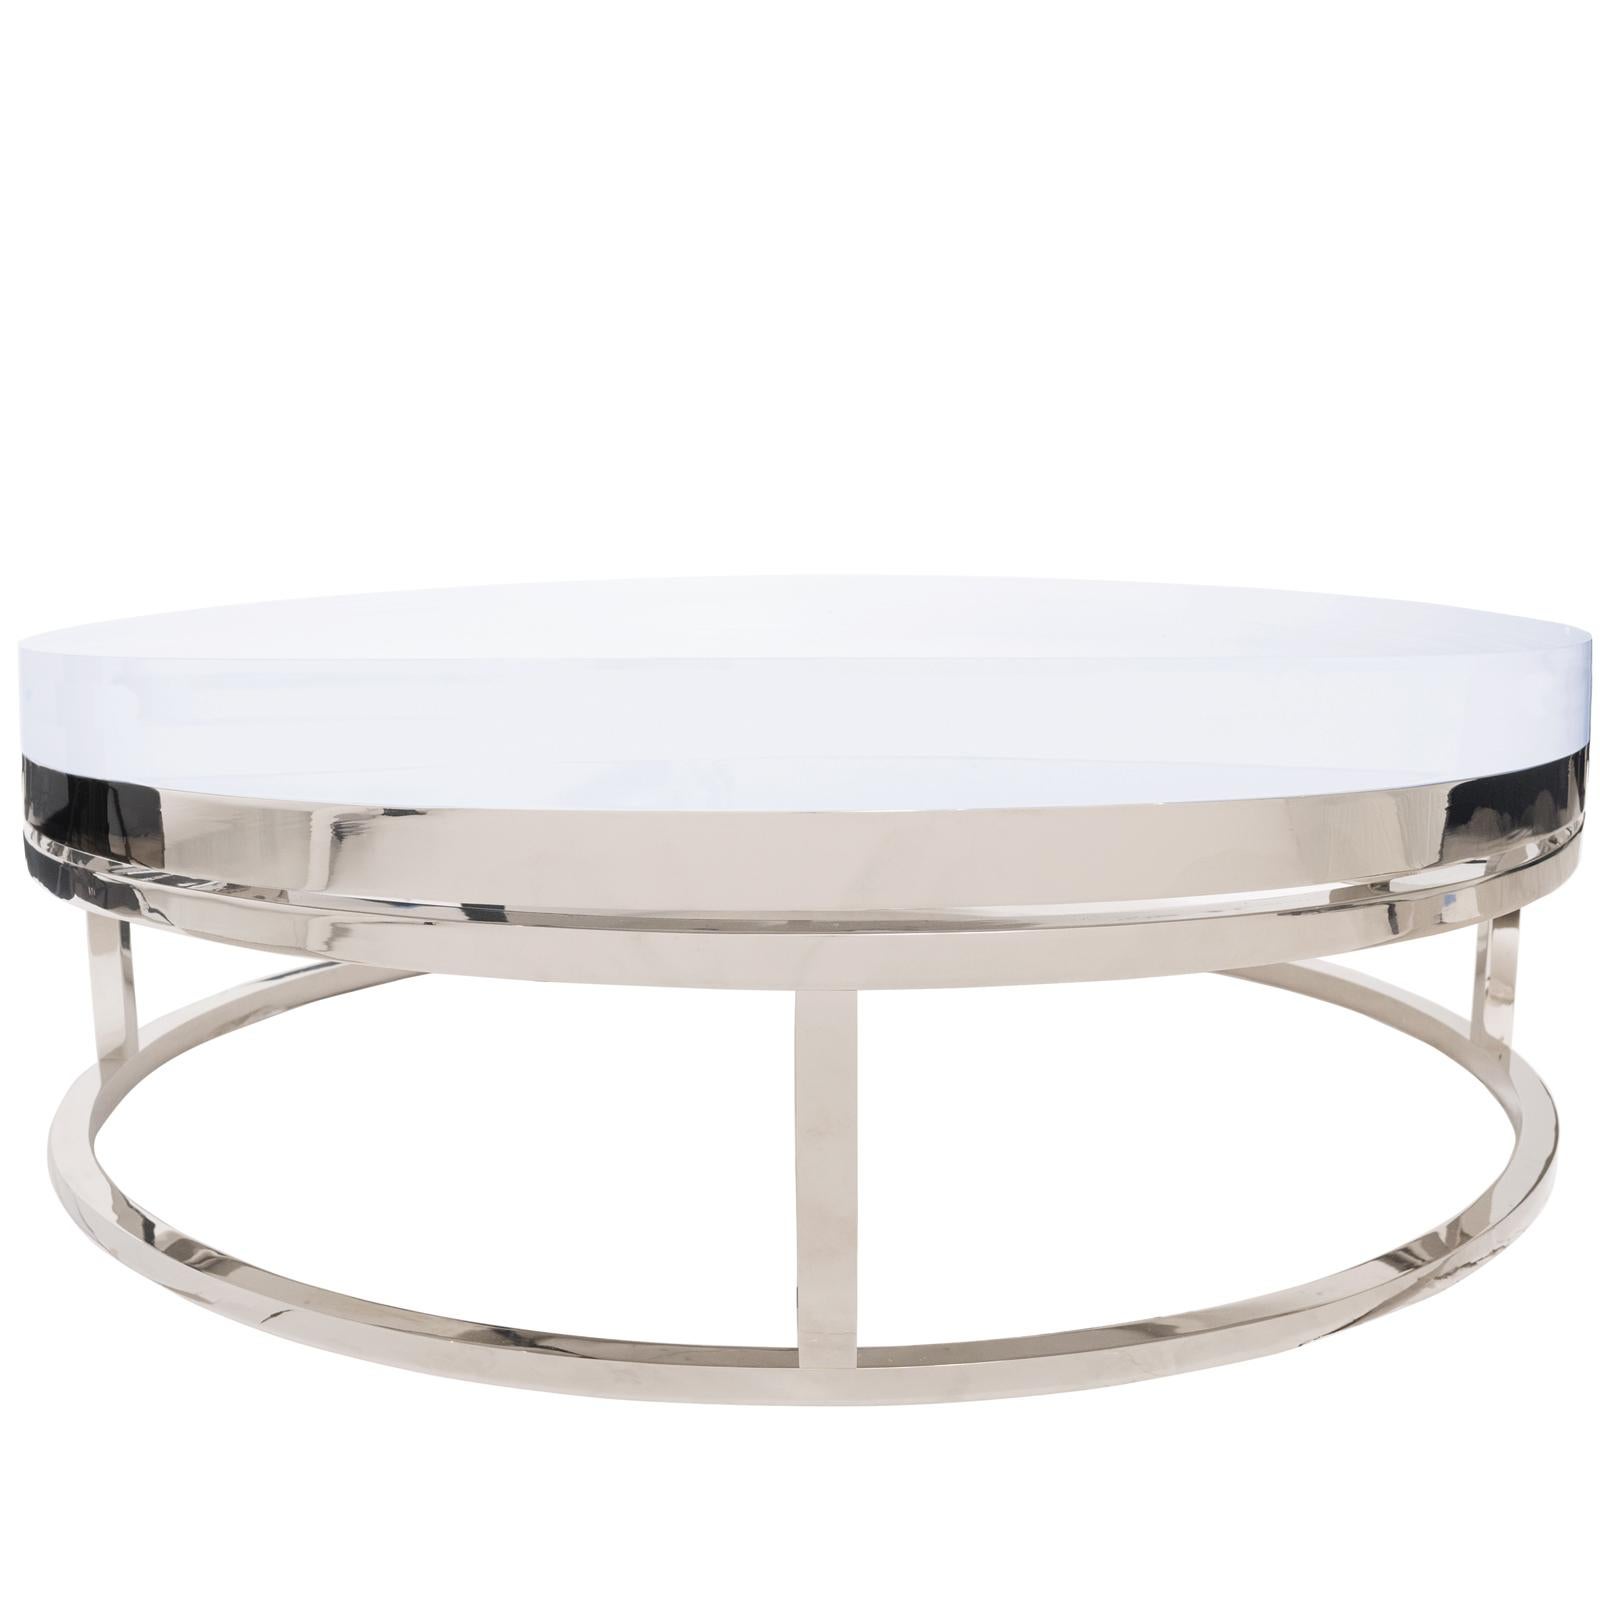 Spectacular Coffee table. Opulent base in polished Stainless steel with a pristine clear acrylic top. Available in custom sizes as well as other metal options (upon request) Ideal as a cocktail table in front of a sofa sectional!